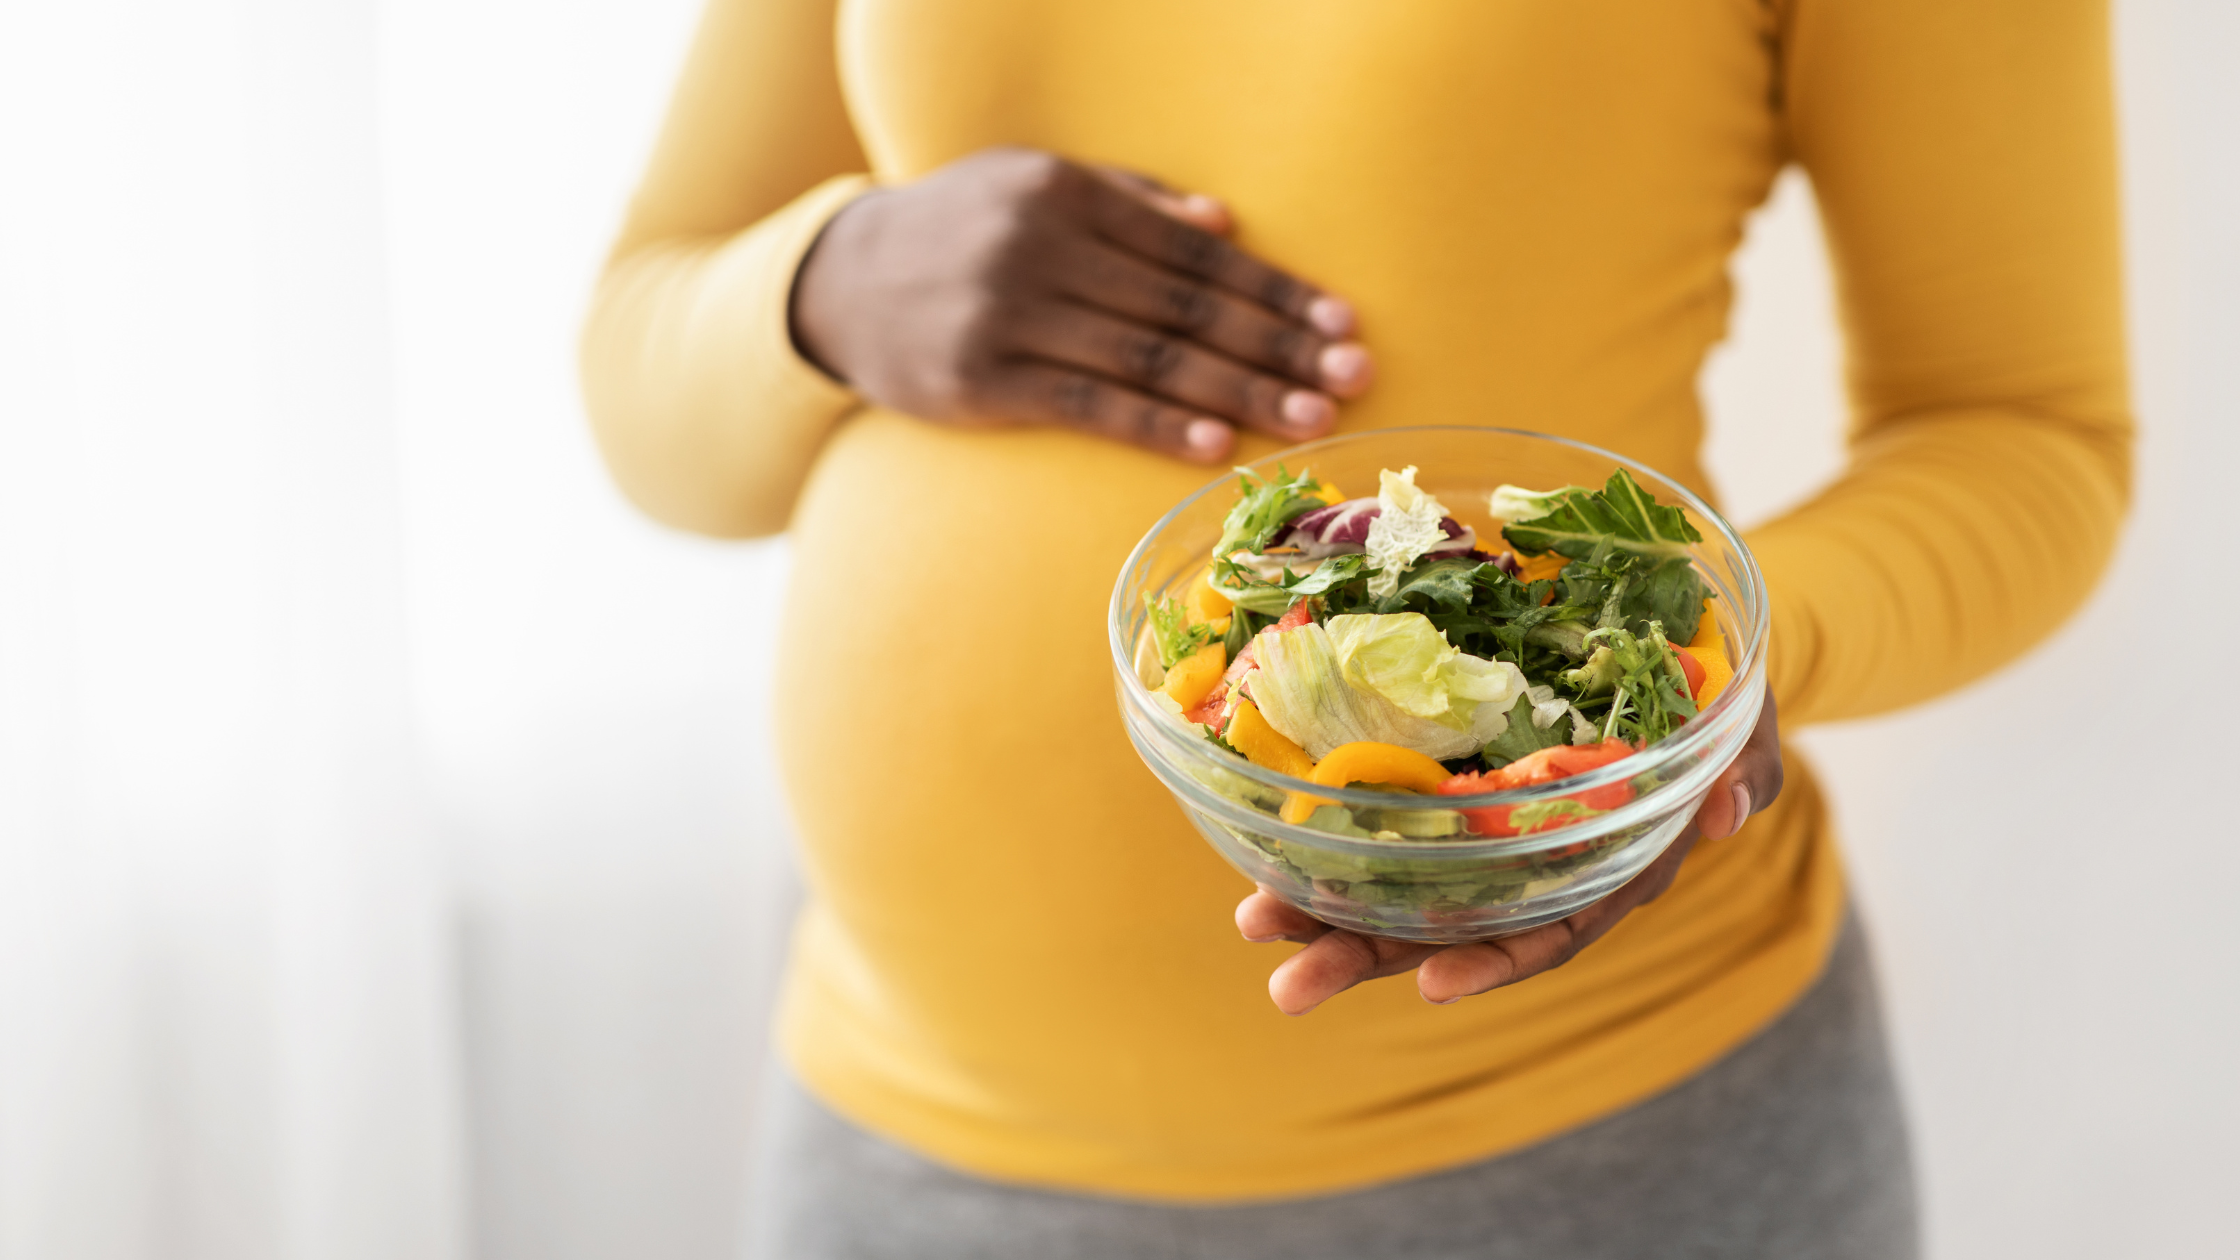 Pregnant lady with bowl of salad